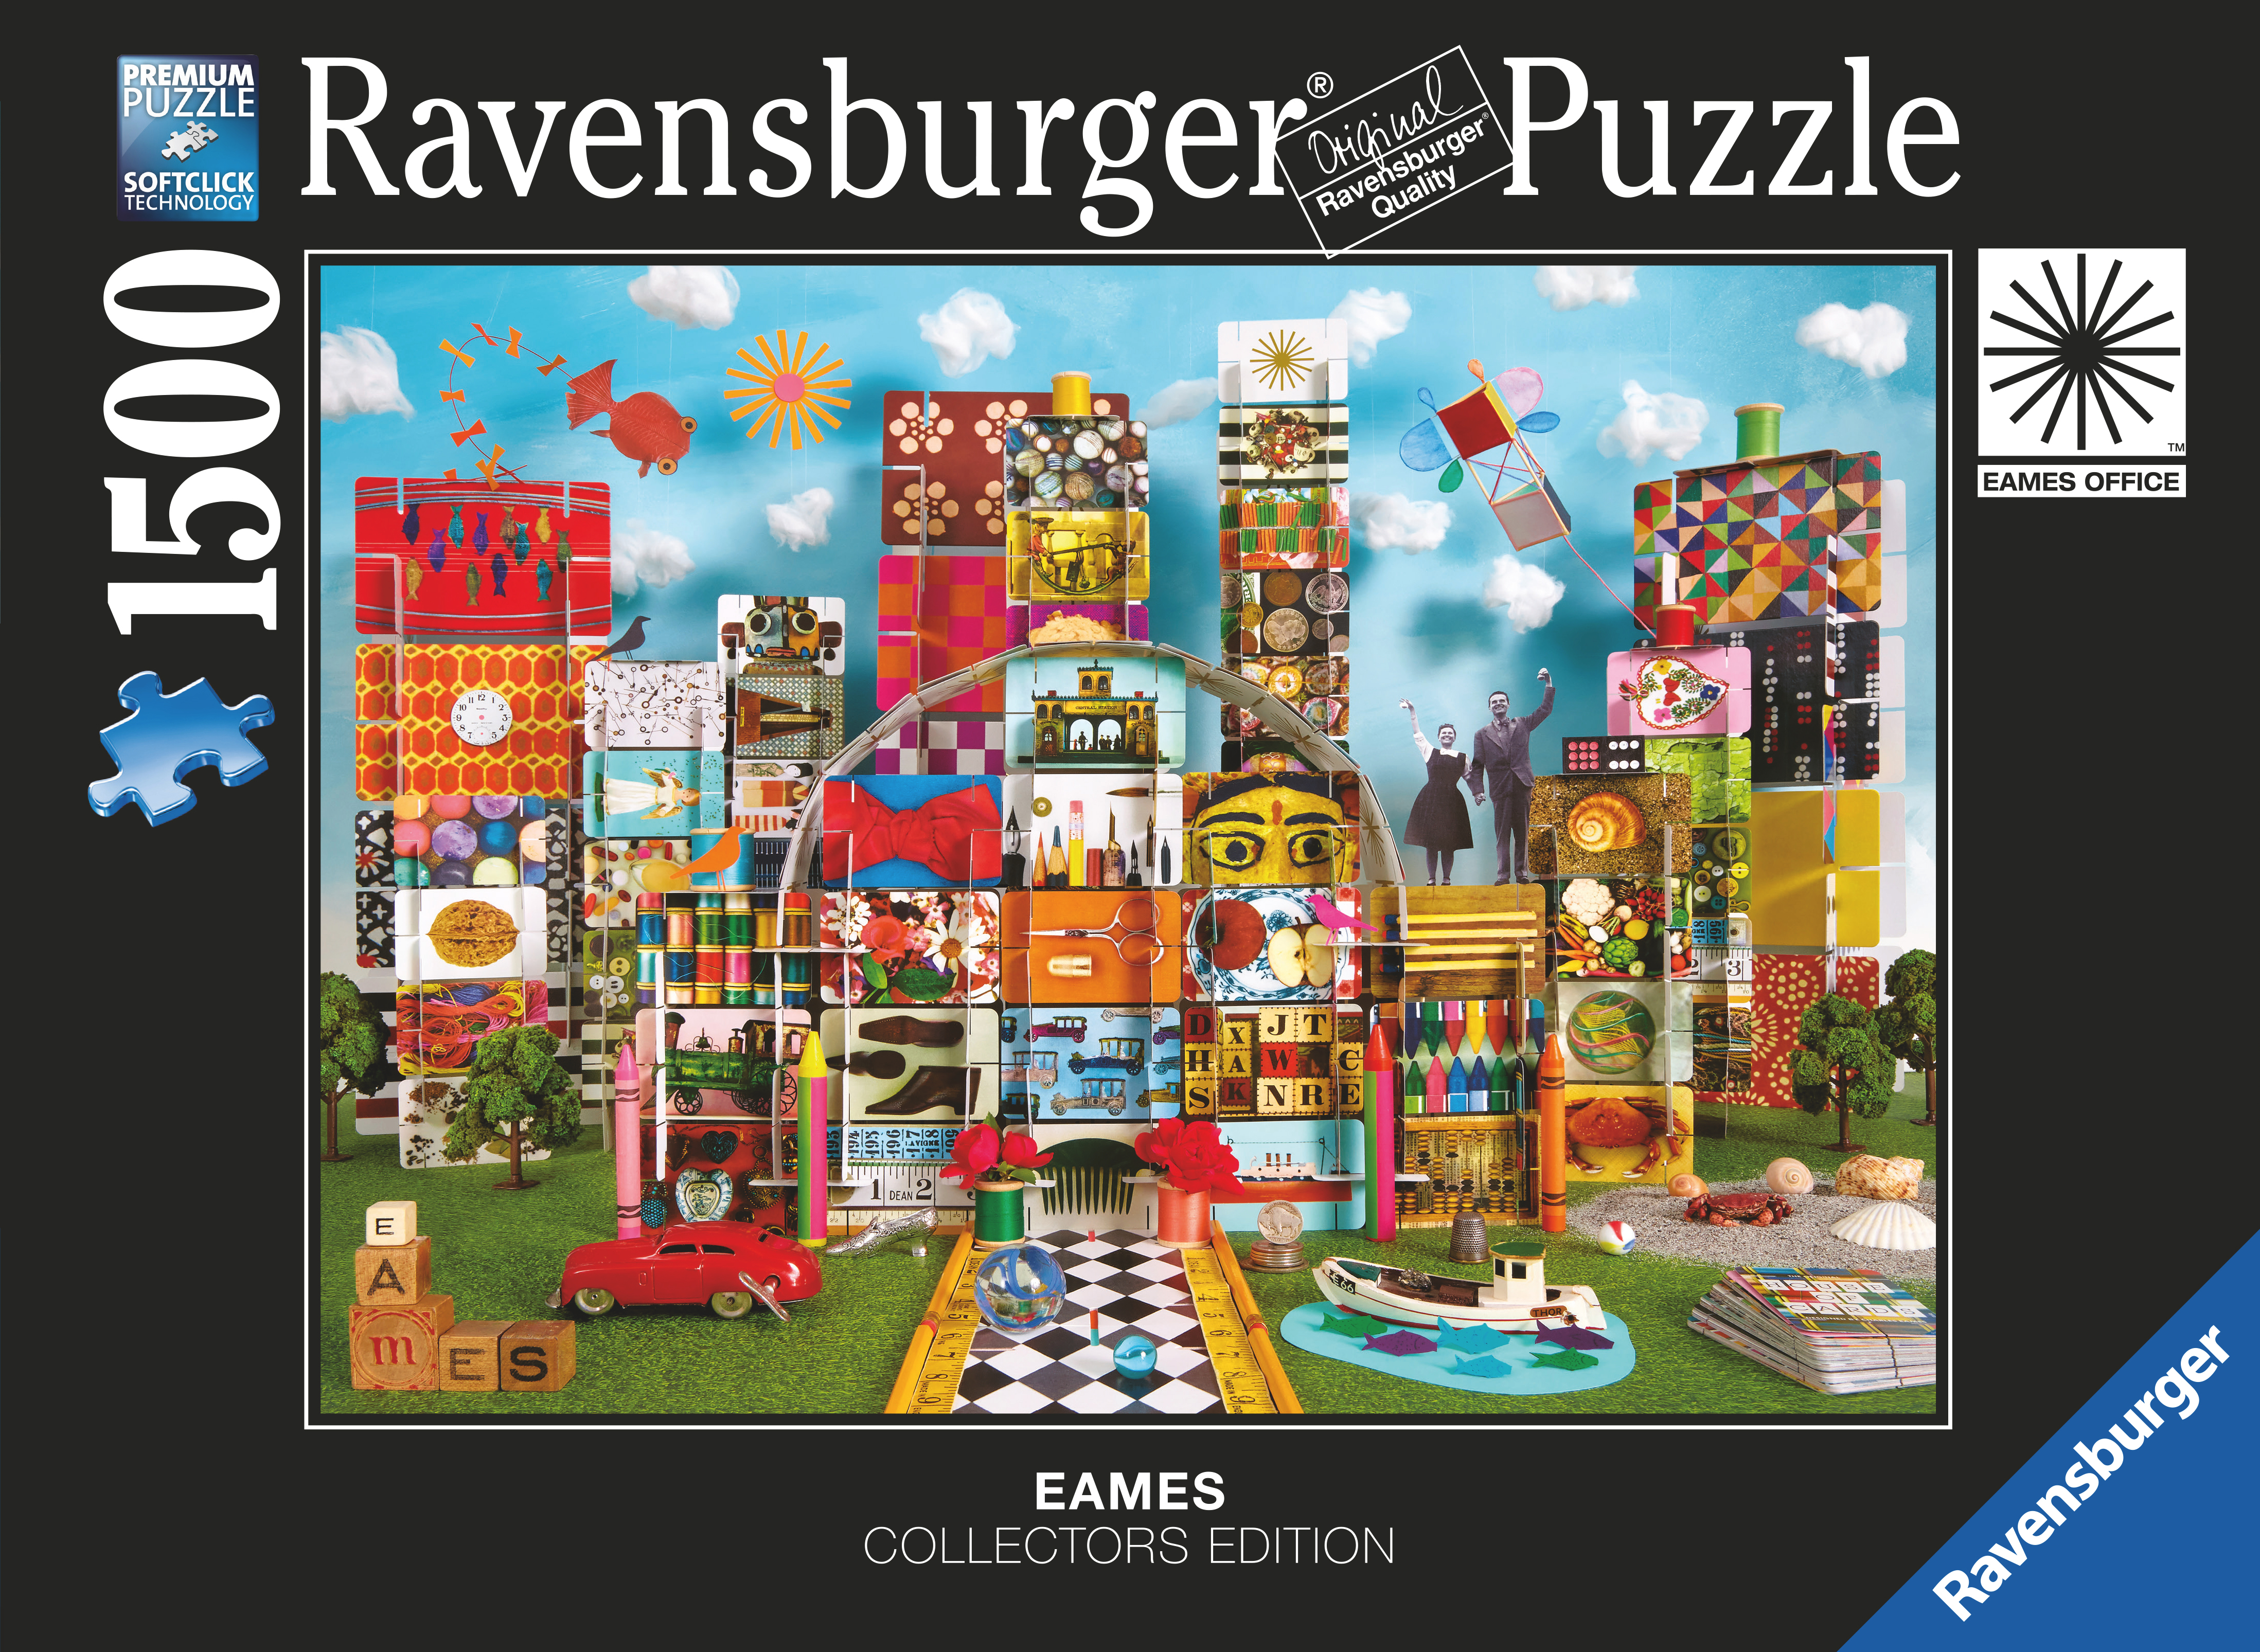 House Mehrfarbig of RAVENSBURGER Puzzle Cards Fantasy Eames